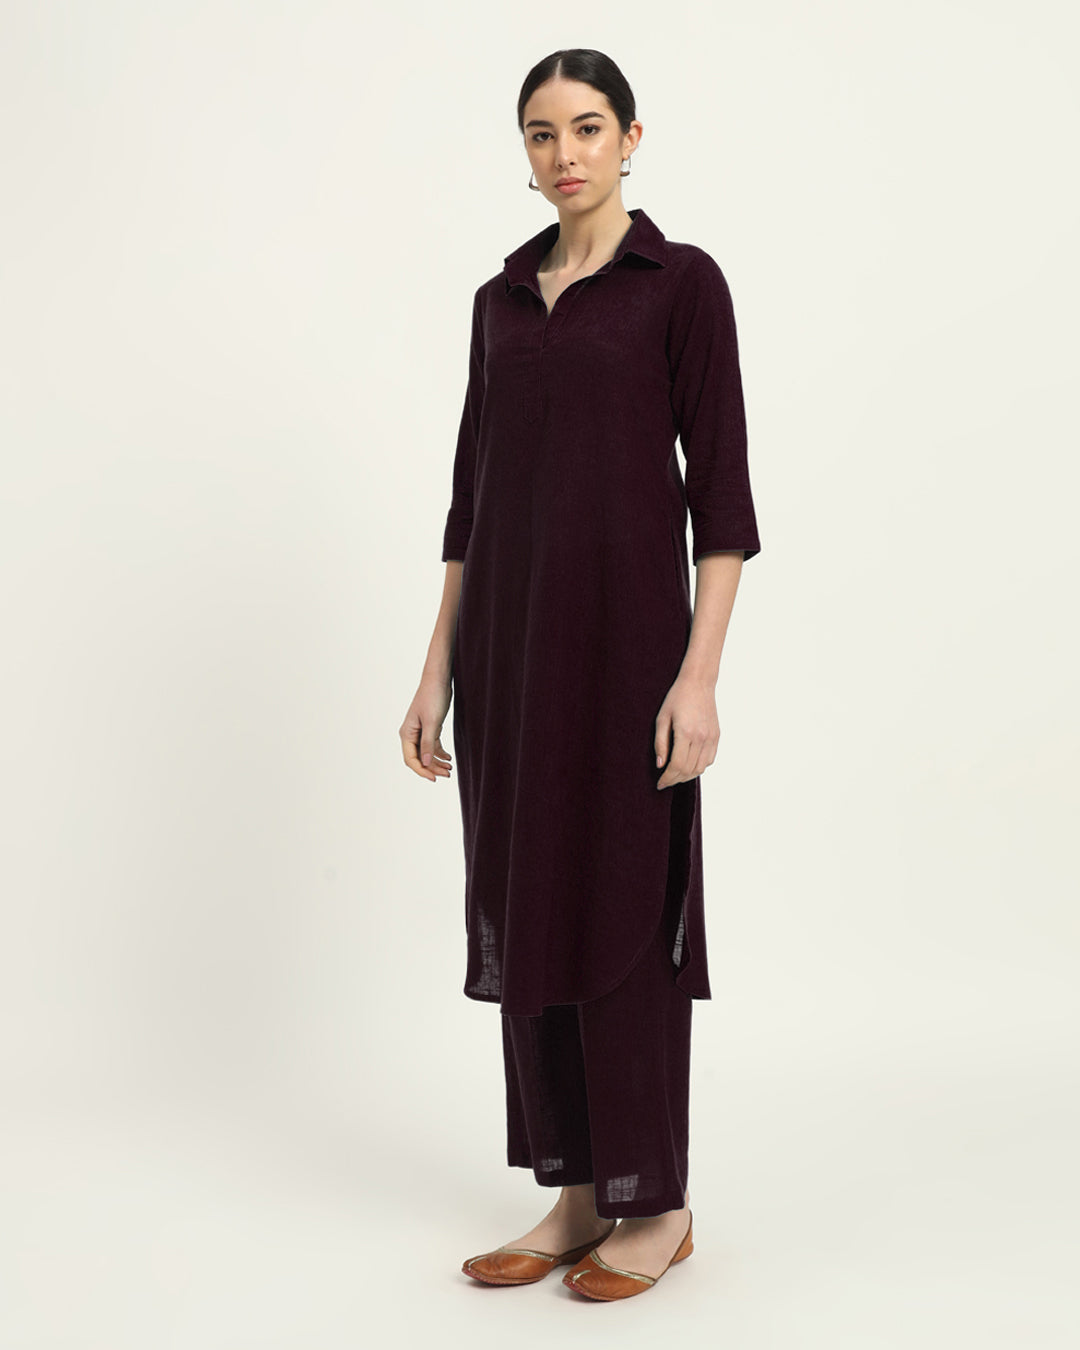 Plum Passion Collar Comfort Solid Kurta (Without Bottoms)